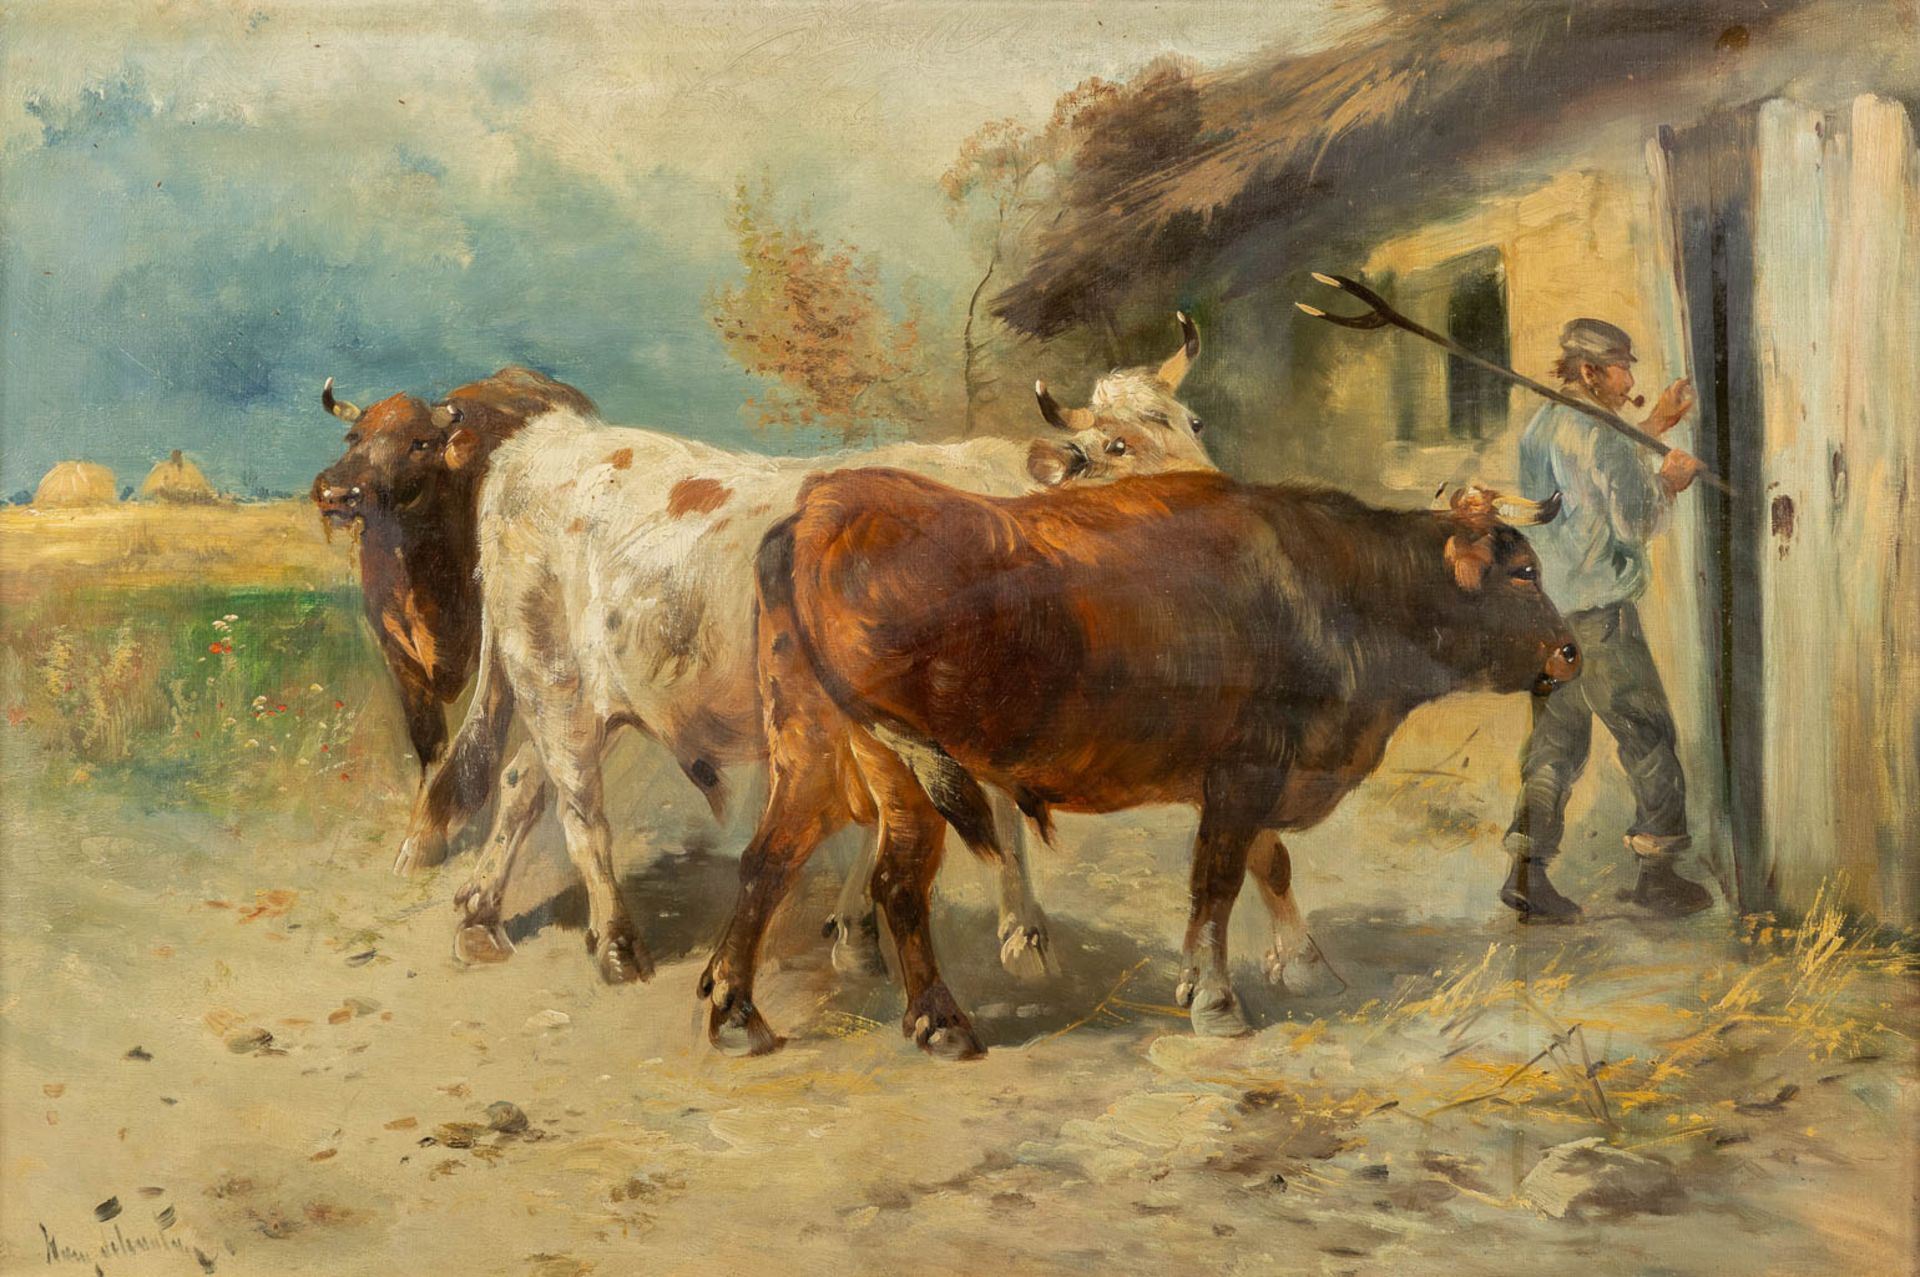 Henry SCHOUTEN (1857/64-1927) 'Farmer and his cows' oil on canvas. (W:90 x H:60 cm)